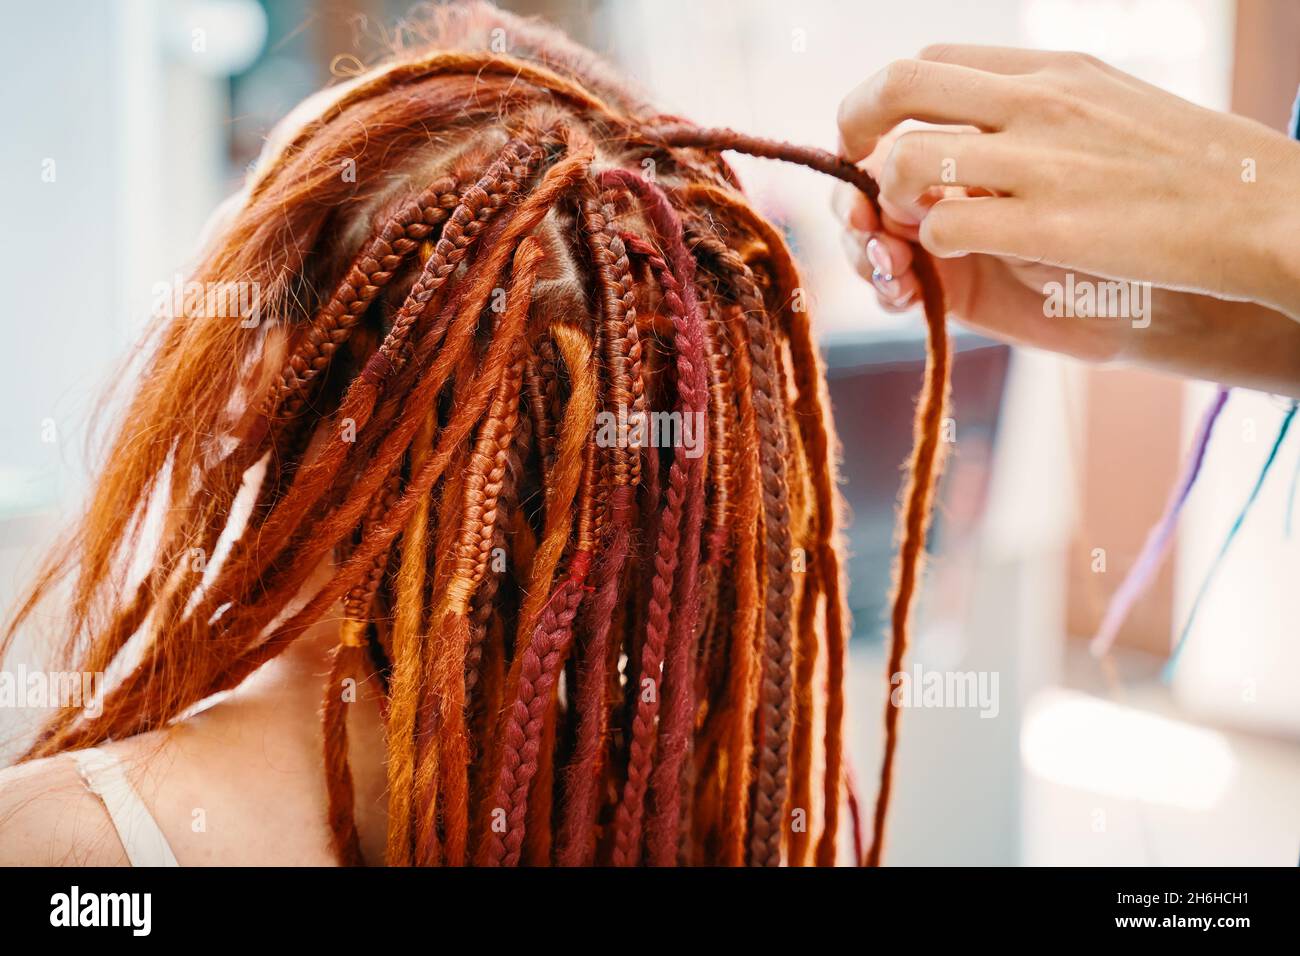 Woman hairdresser weaves girl ginger dreadlocks. Stylish therapy professional care concept. Close up of braiding process plait with colored kanekalon. Hippie style hairstyle. Beauty salon services. Stock Photo